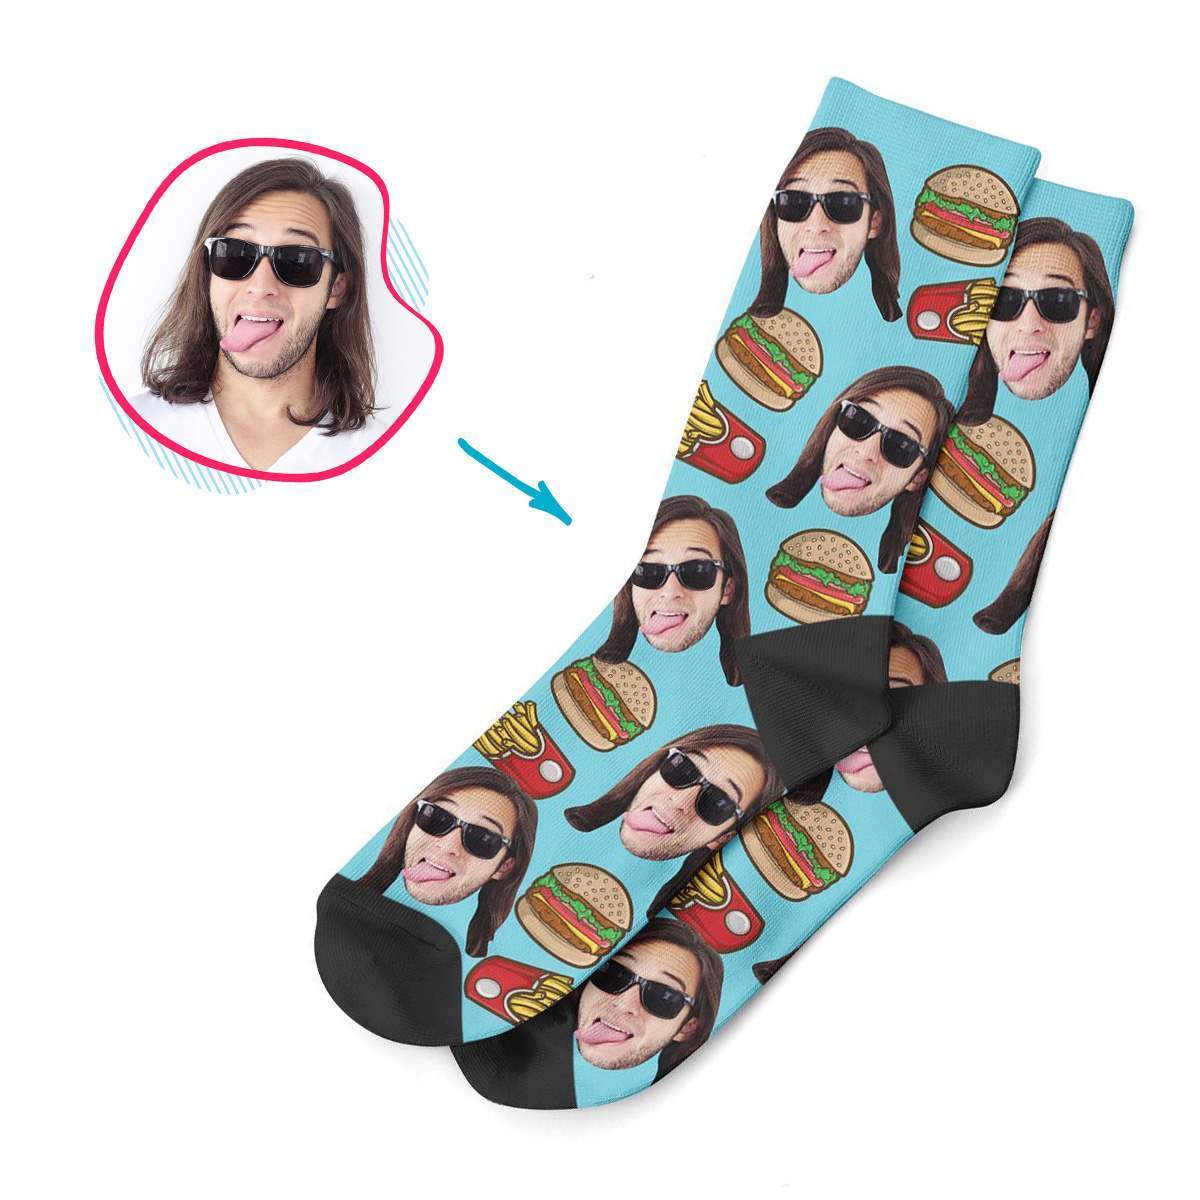 blue Fastfood socks personalized with photo of face printed on them